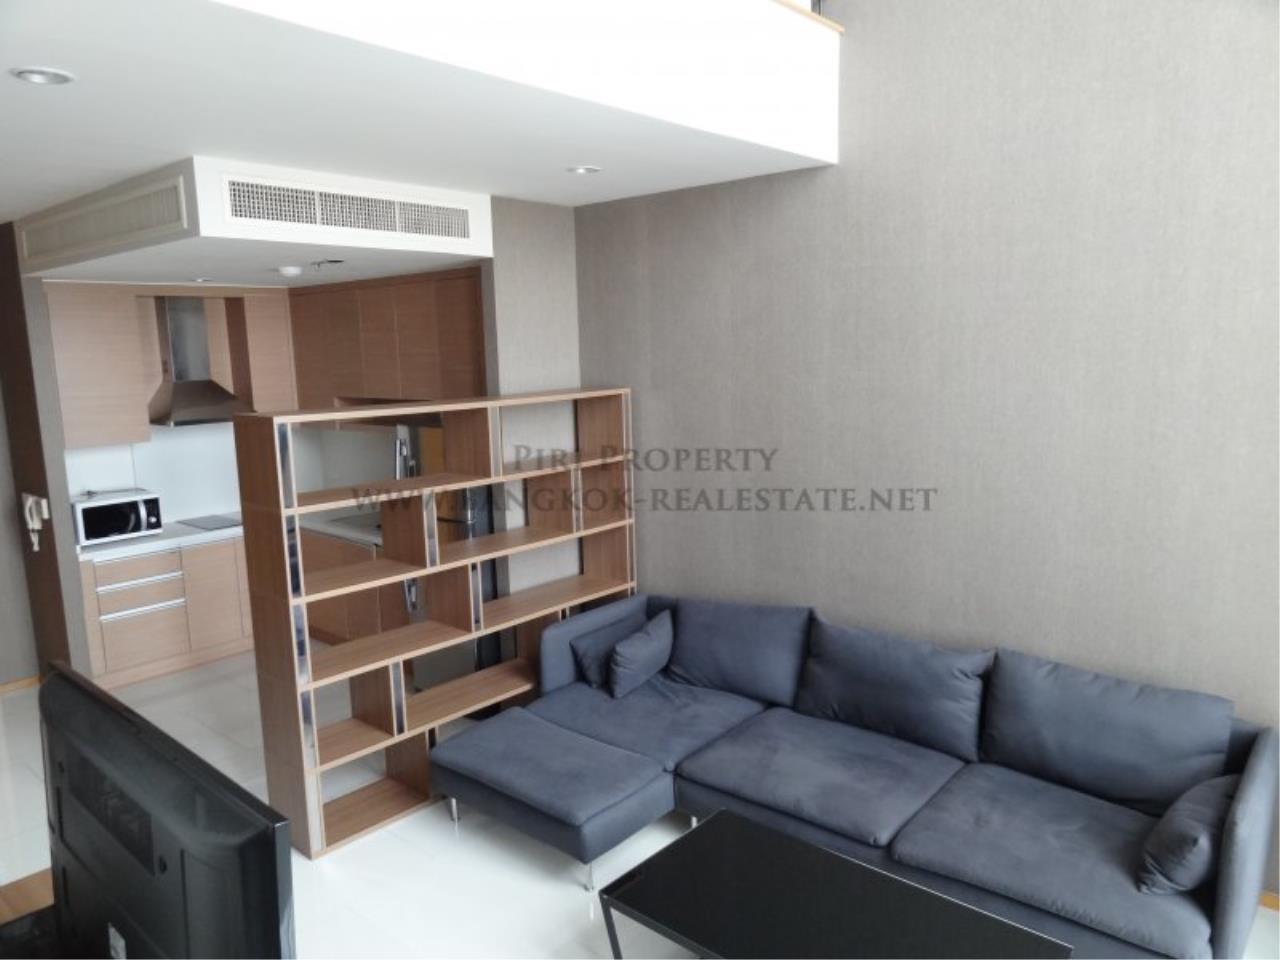 Piri Property Agency's Minimalistic Style - Emporio Duplex Condo for Rent - 1 Bedroom with nice view 7